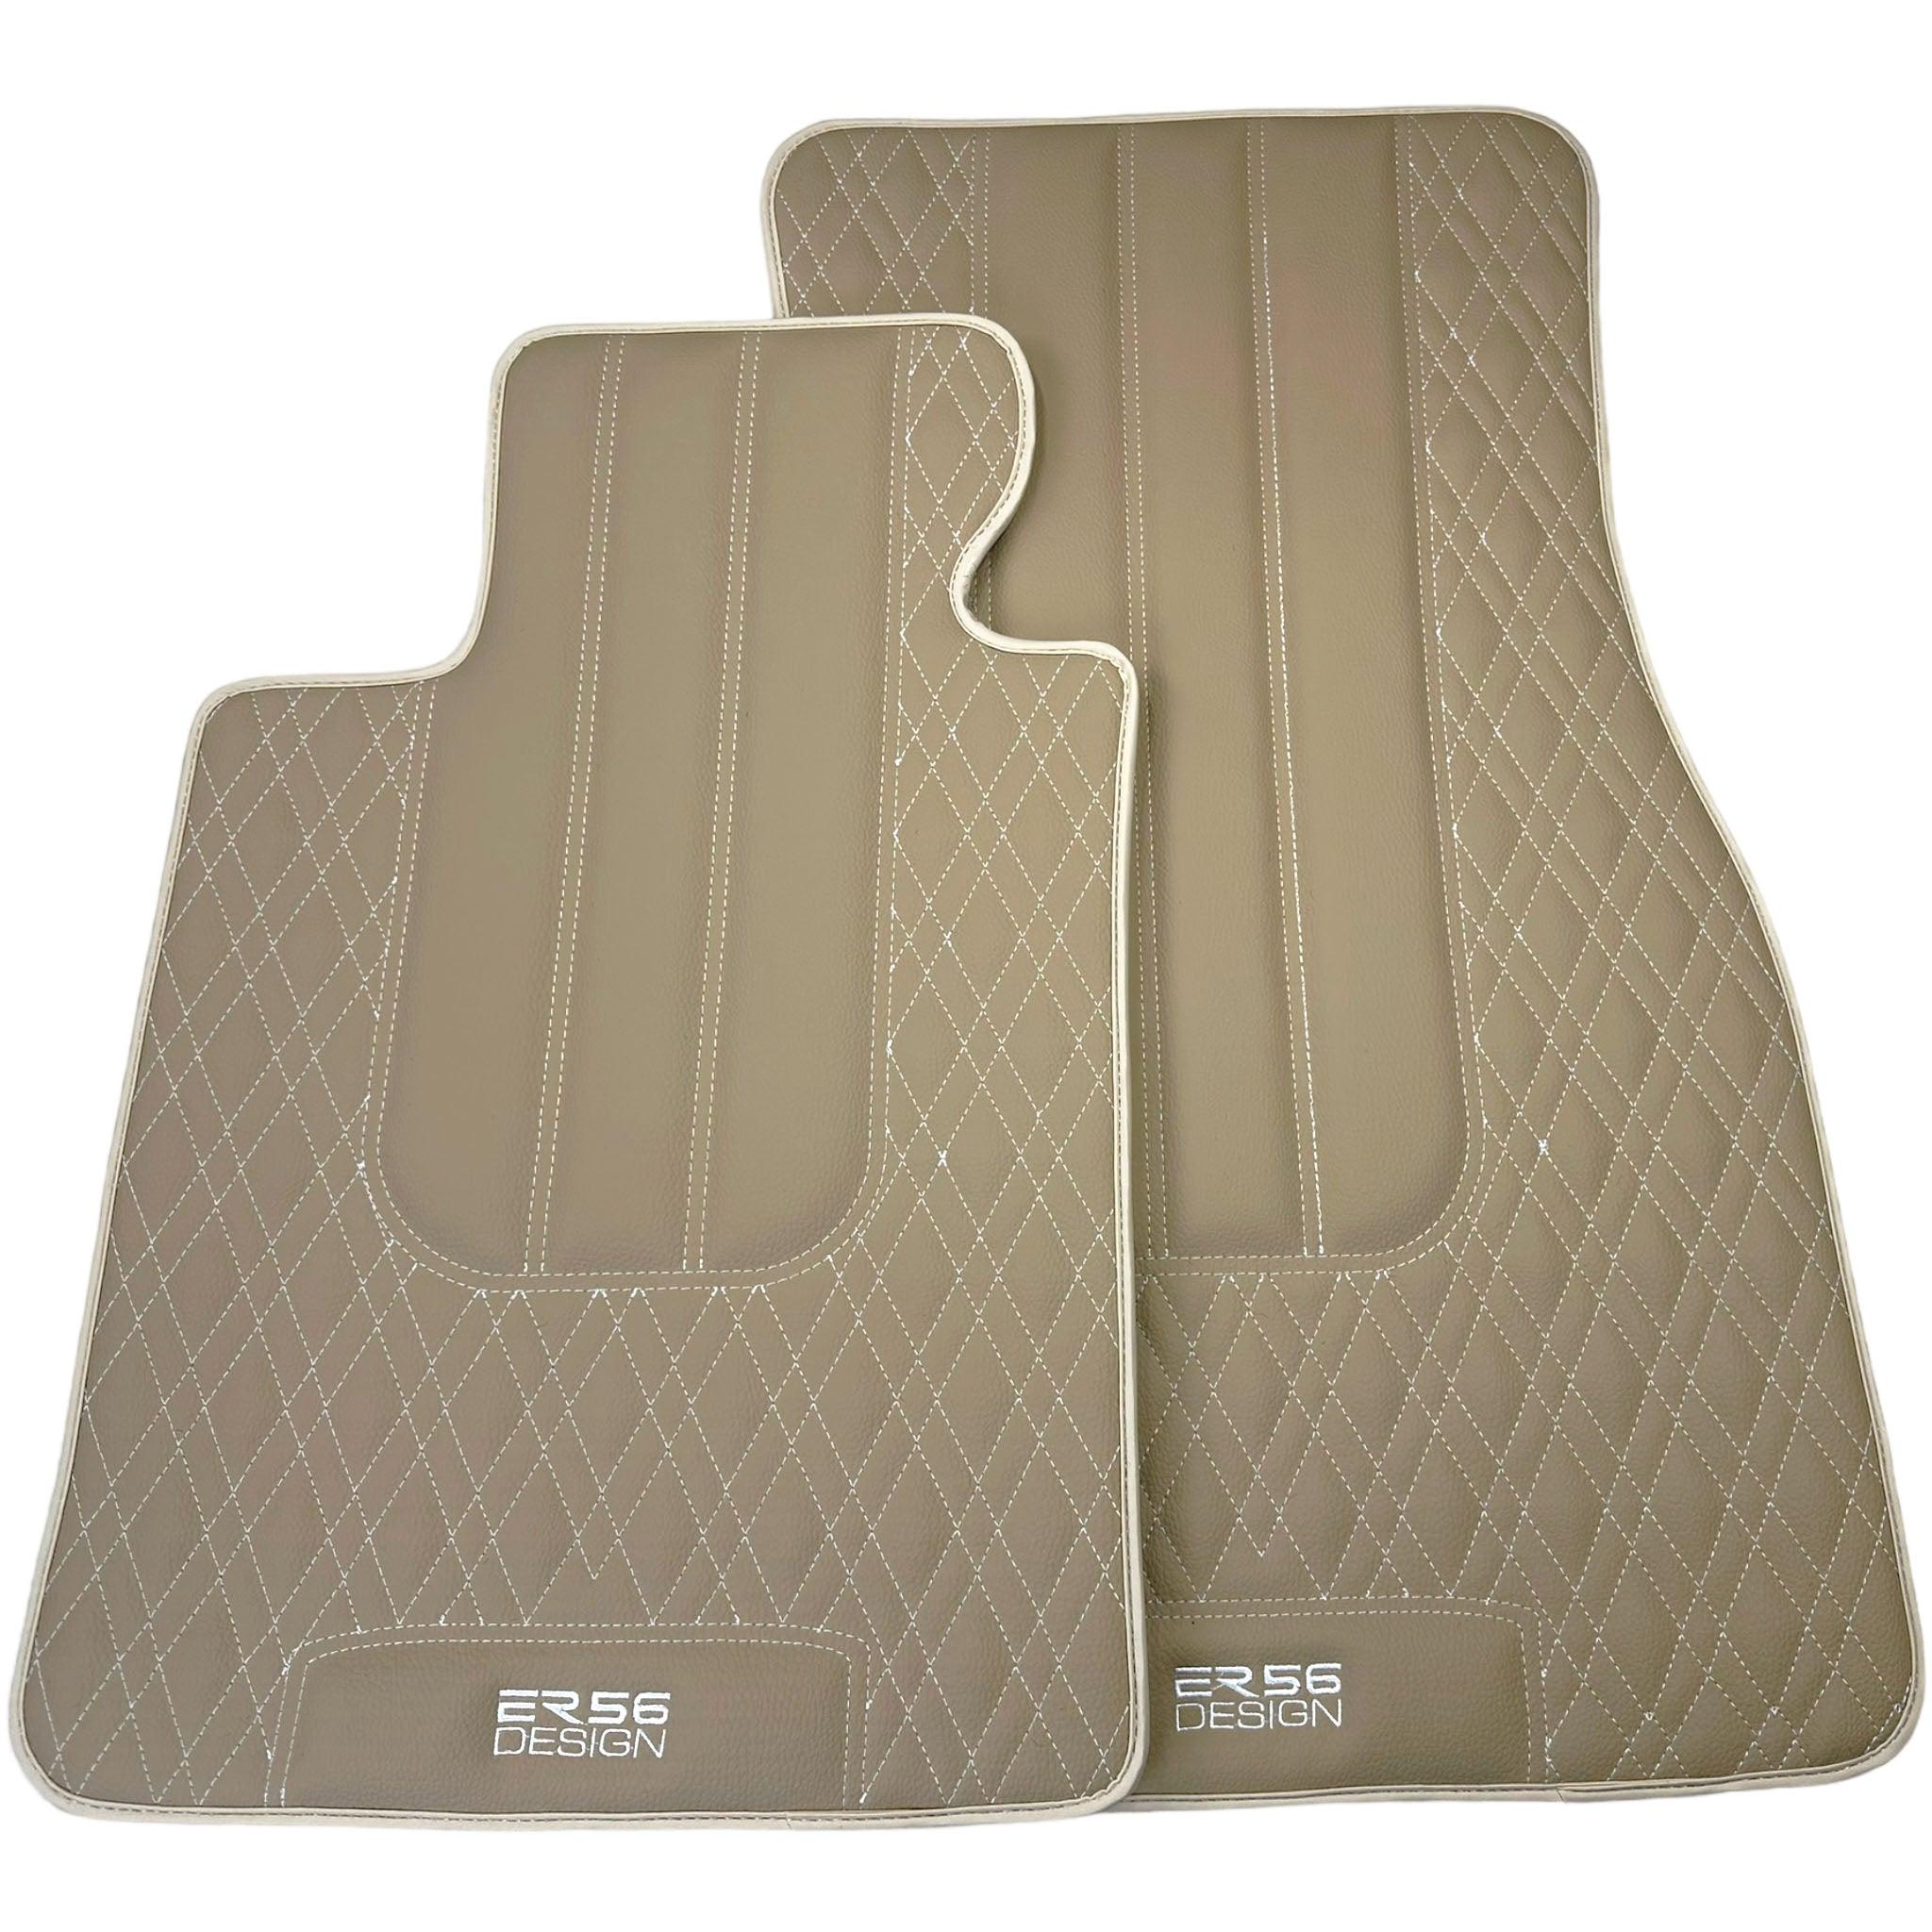 Beige Leather Floor Floor Mats For BMW 6 Series F06 Gran Coupe | Fighter Jet Edition AutoWin Brand |Sky Blue Trim